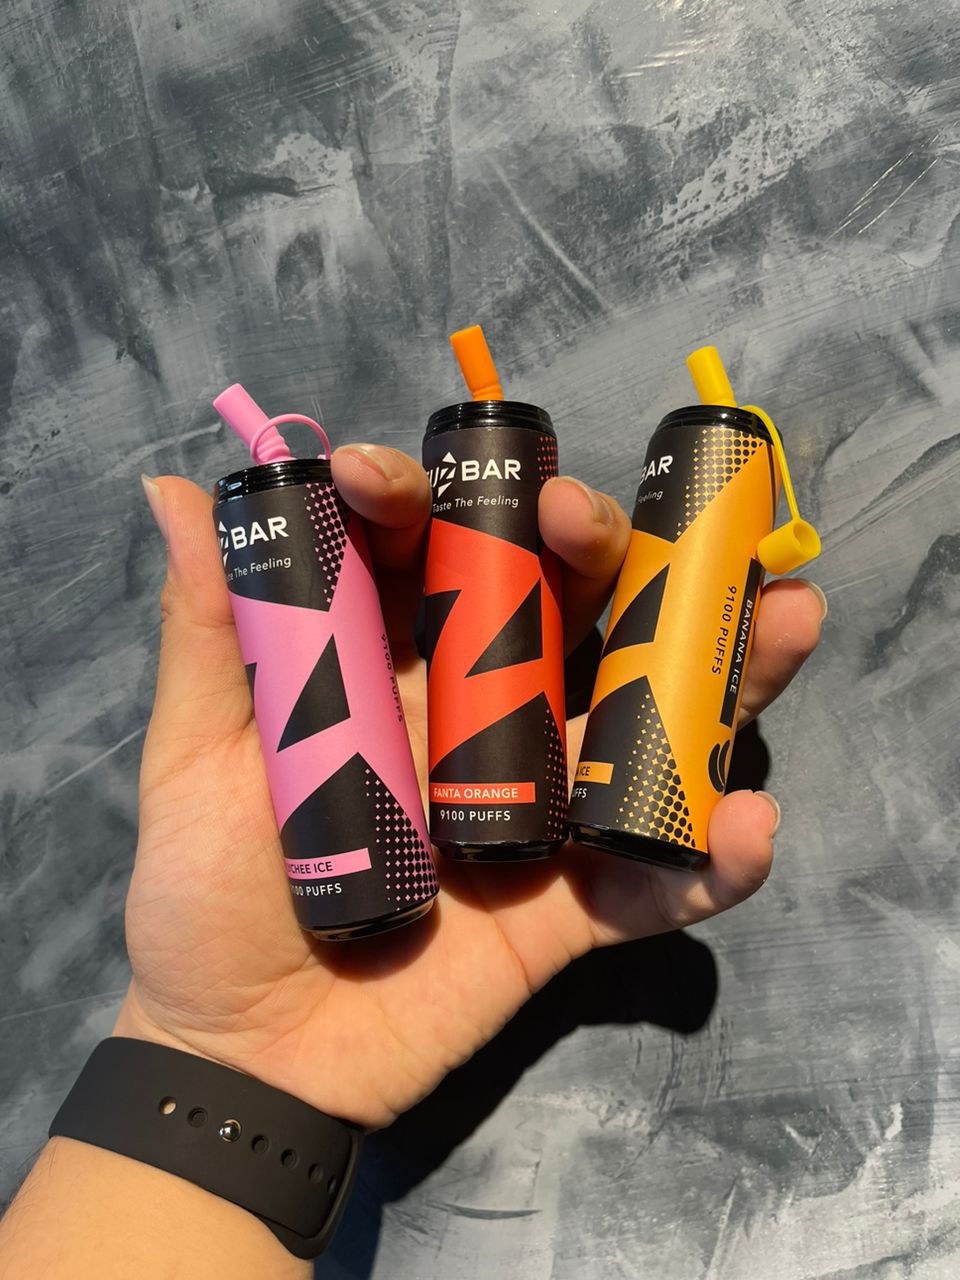 singapore vape delivery , where to buy vape in singapore , vape sg , vaping in singapore , elfbar singapore , elfbar sg , lana singapore ,  lana sg , rone singapore , rone sg , zeuz singapore , zeuz sg , voltbar singapore , voltbar sg , vapetape singapore , vapetape sg ,  sp2 singapore , sp2 sg , vaping singapore , vaping sg , buy vape in singapore 